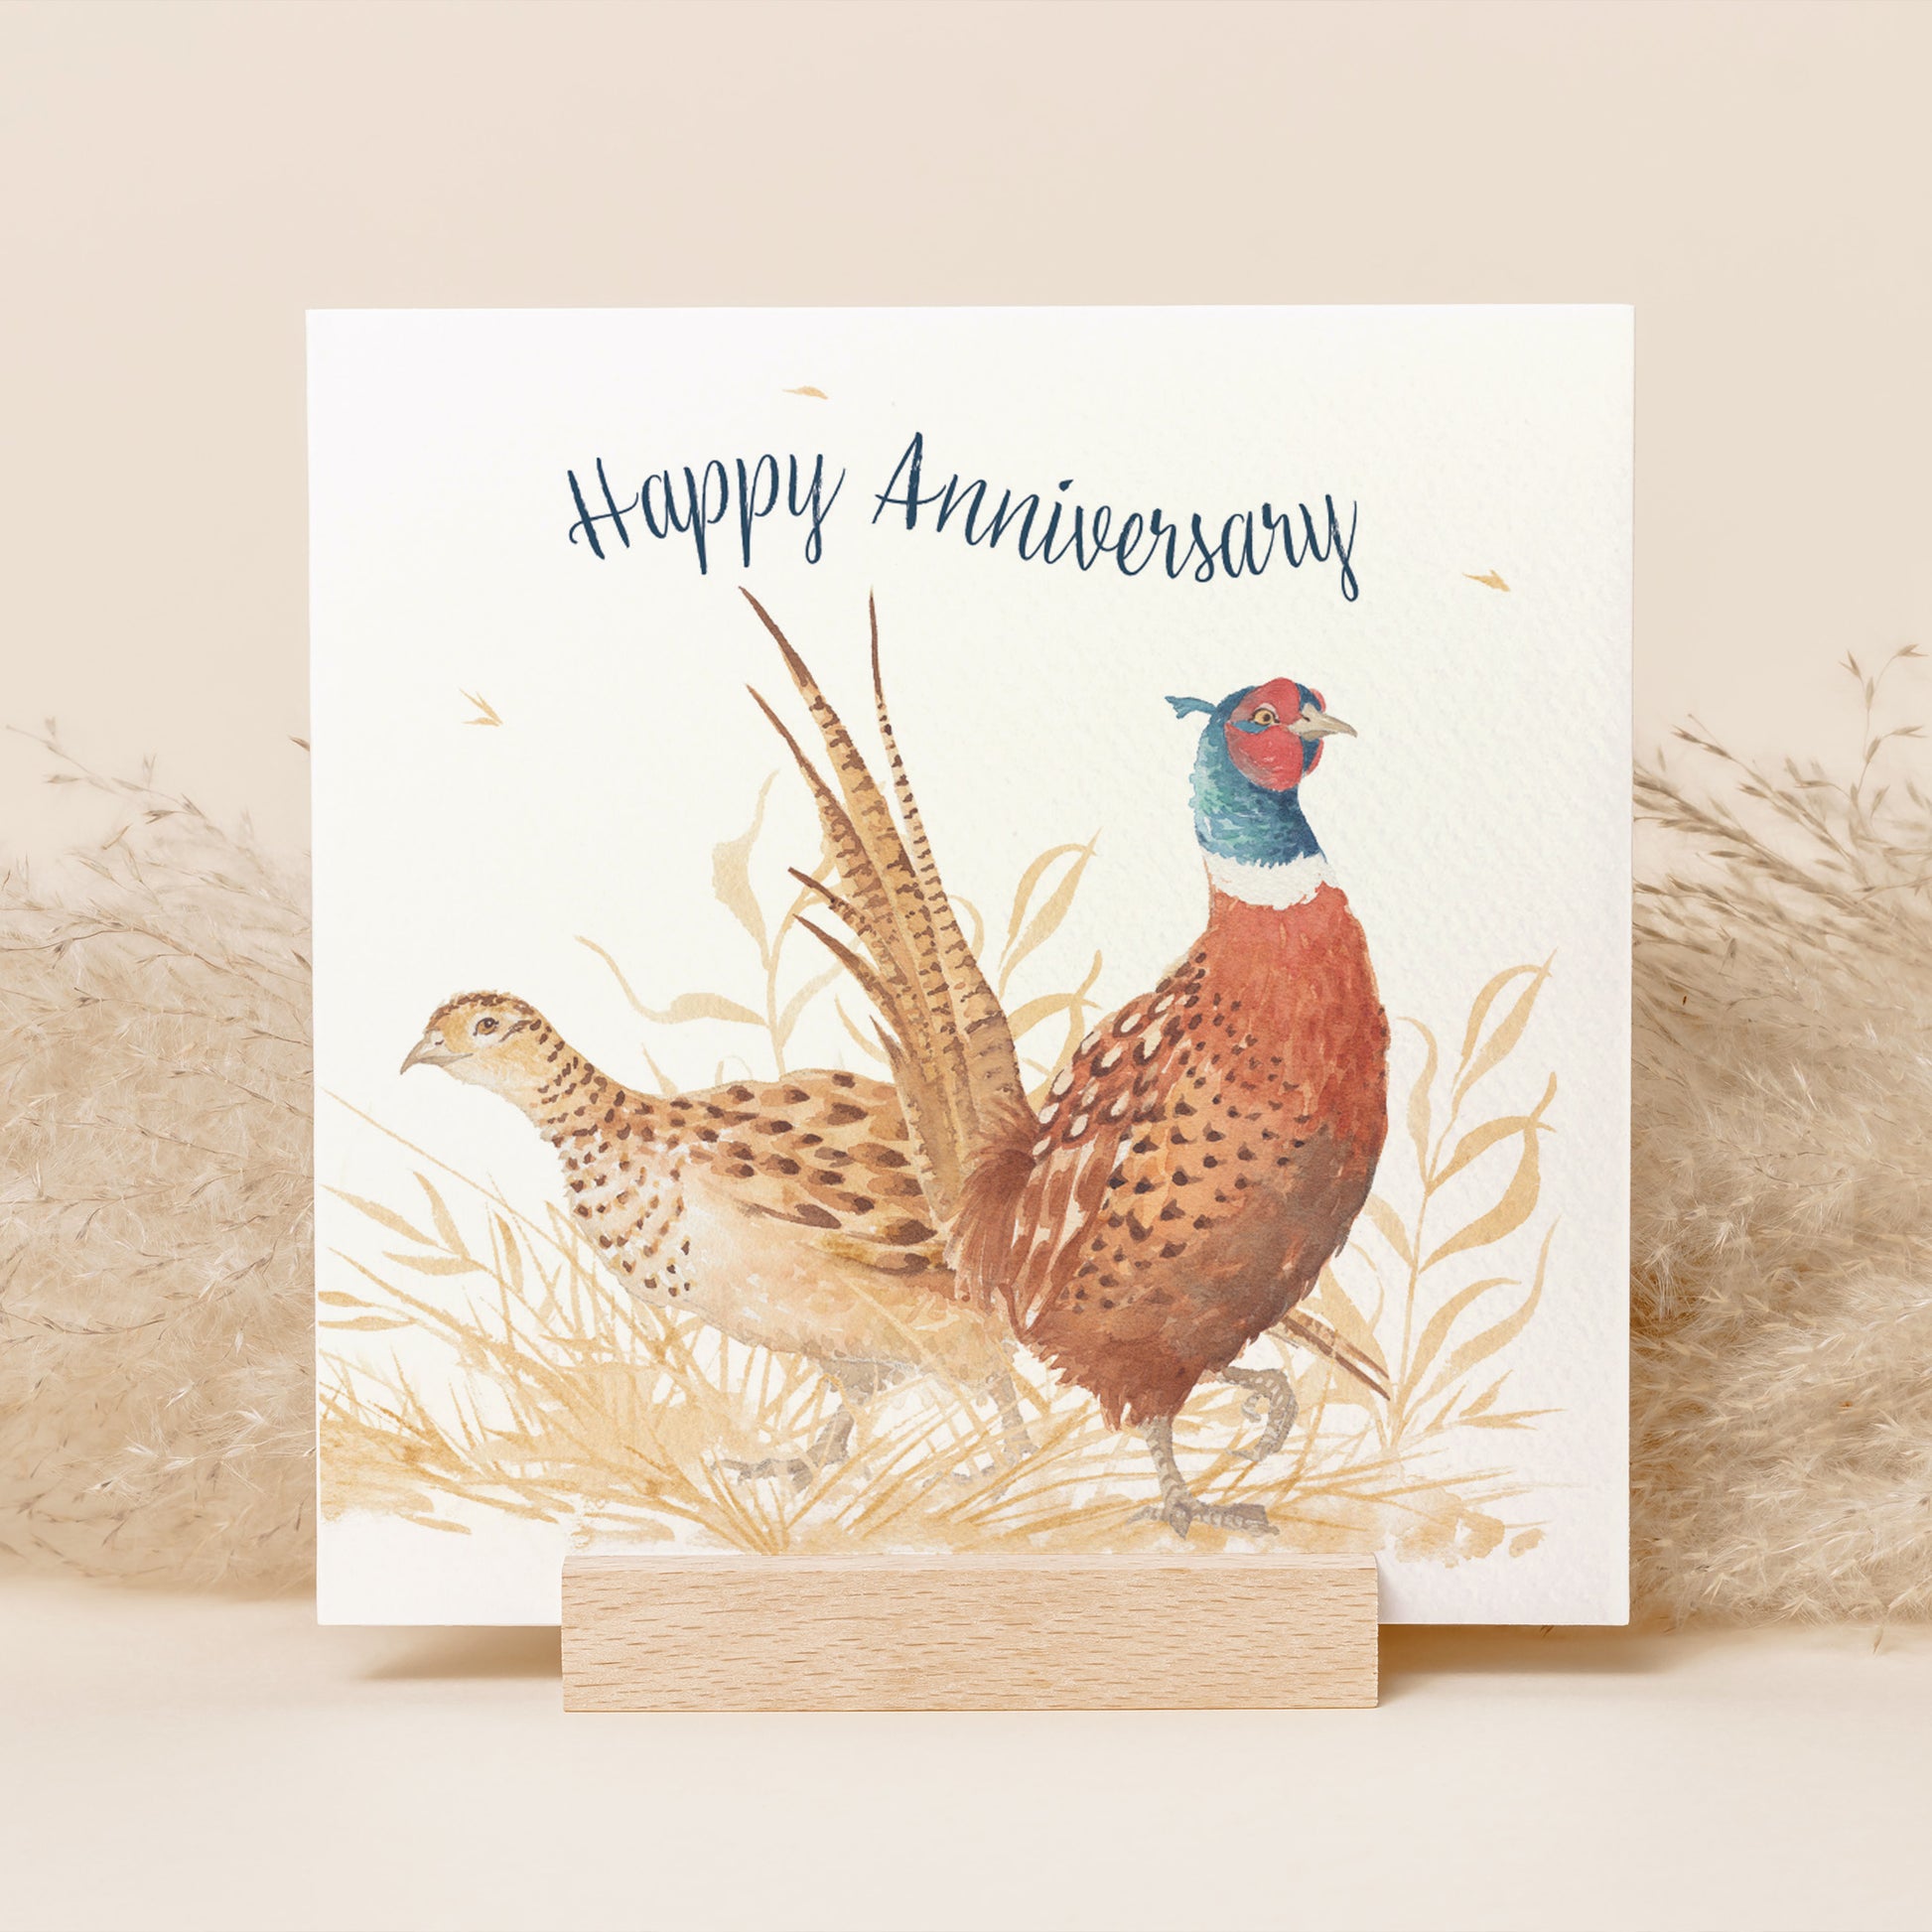 A greetings card reading Happy Anniversary in dark blue text above a male and female pheasant couple in a watercolour style.